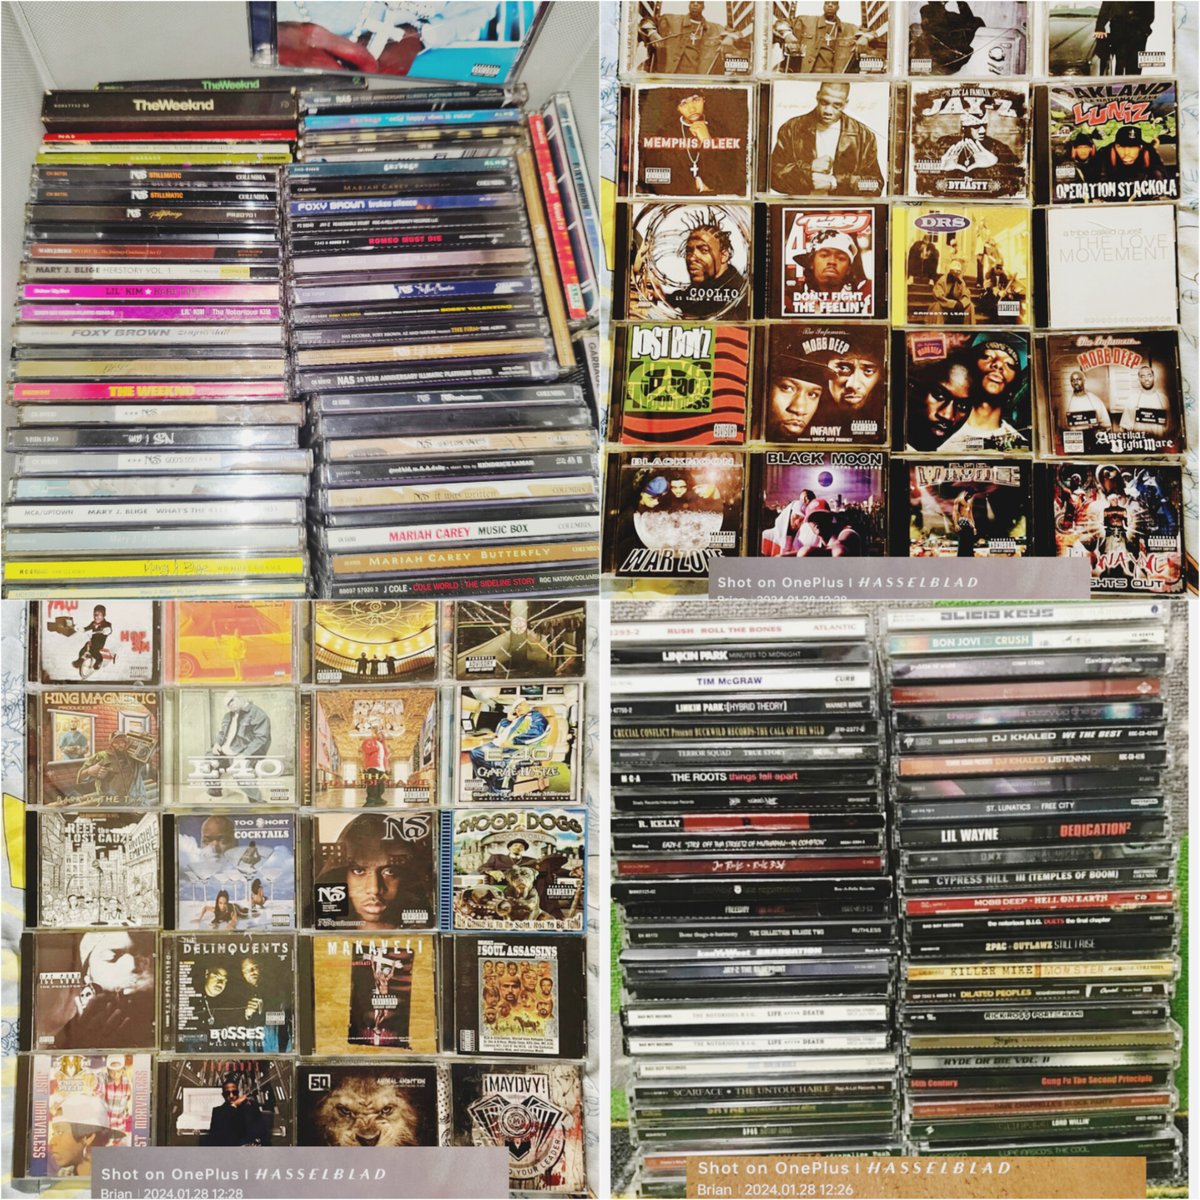 If hoarding CDs from the 80s- early 00s was a disease, I need hospitalization now. Lol 😂😂 #Rap #CD #80sRap #90sRap #00sRap